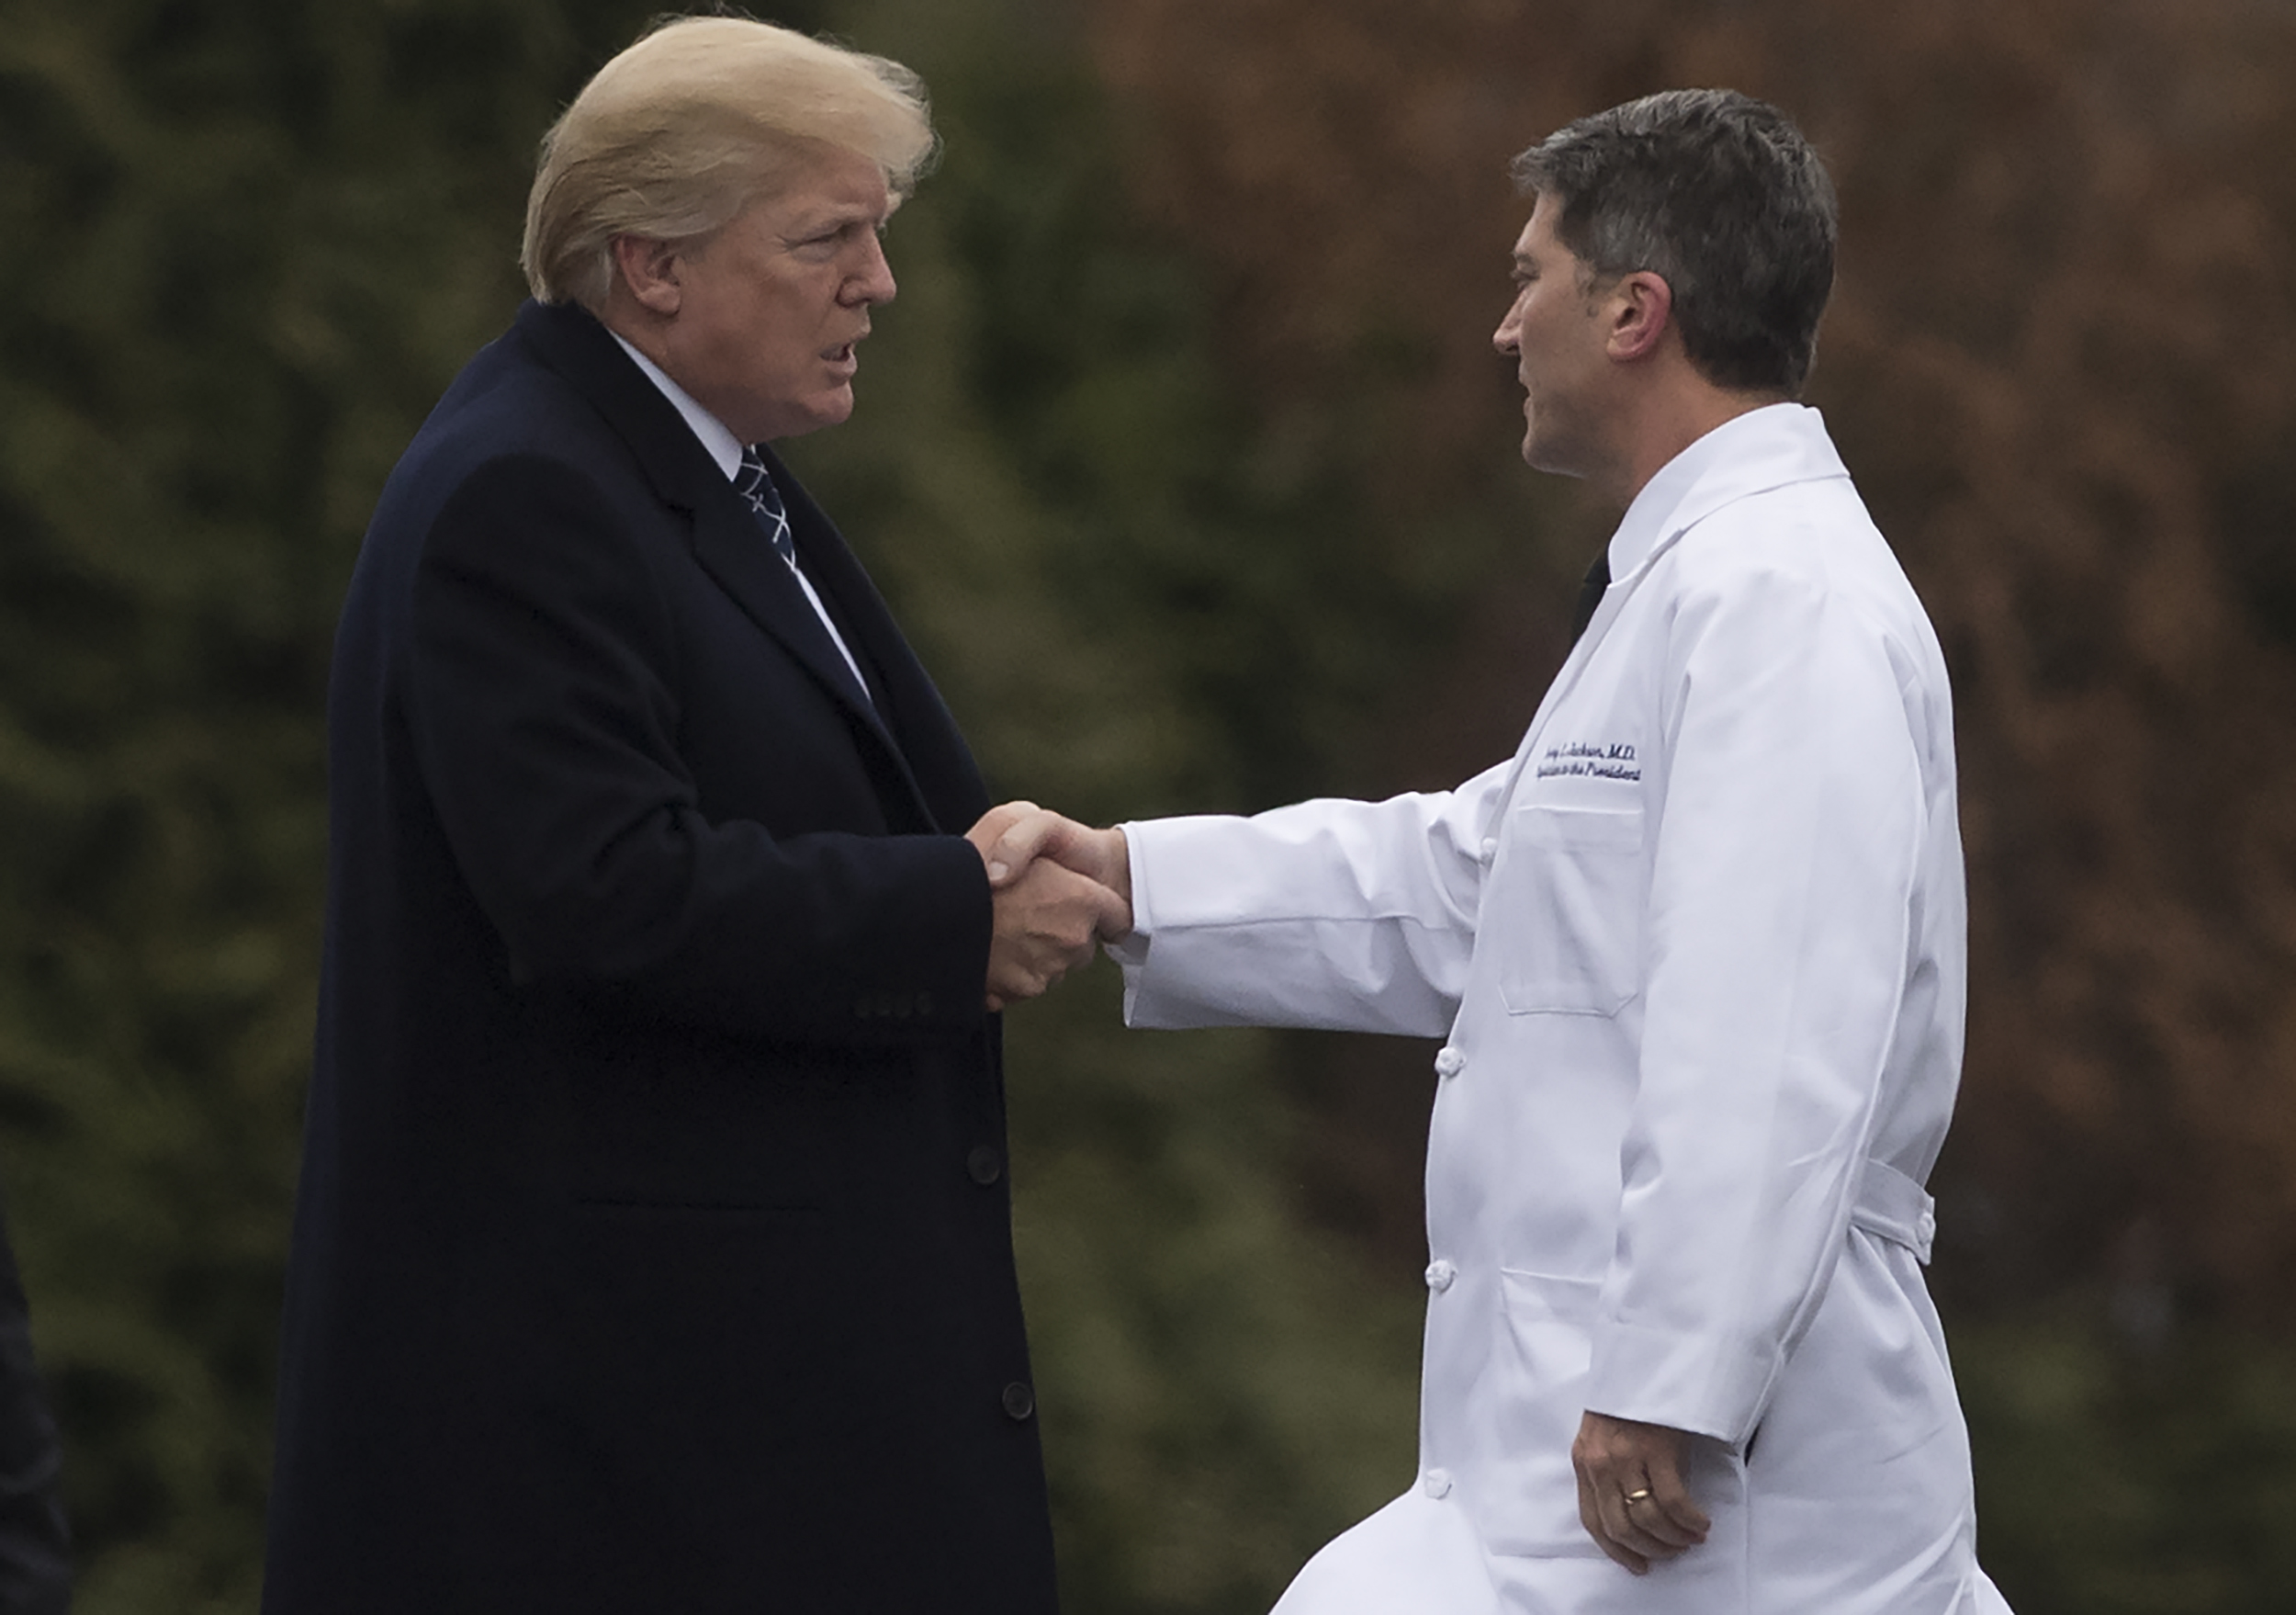 PHOTO: President Donald Trump shakes hands with White House Physician Rear Admiral Dr. Ronny Jackson, following his annual physical at Walter Reed National Military Medical Center in Bethesda, Maryland, Jan. 12, 2018. 